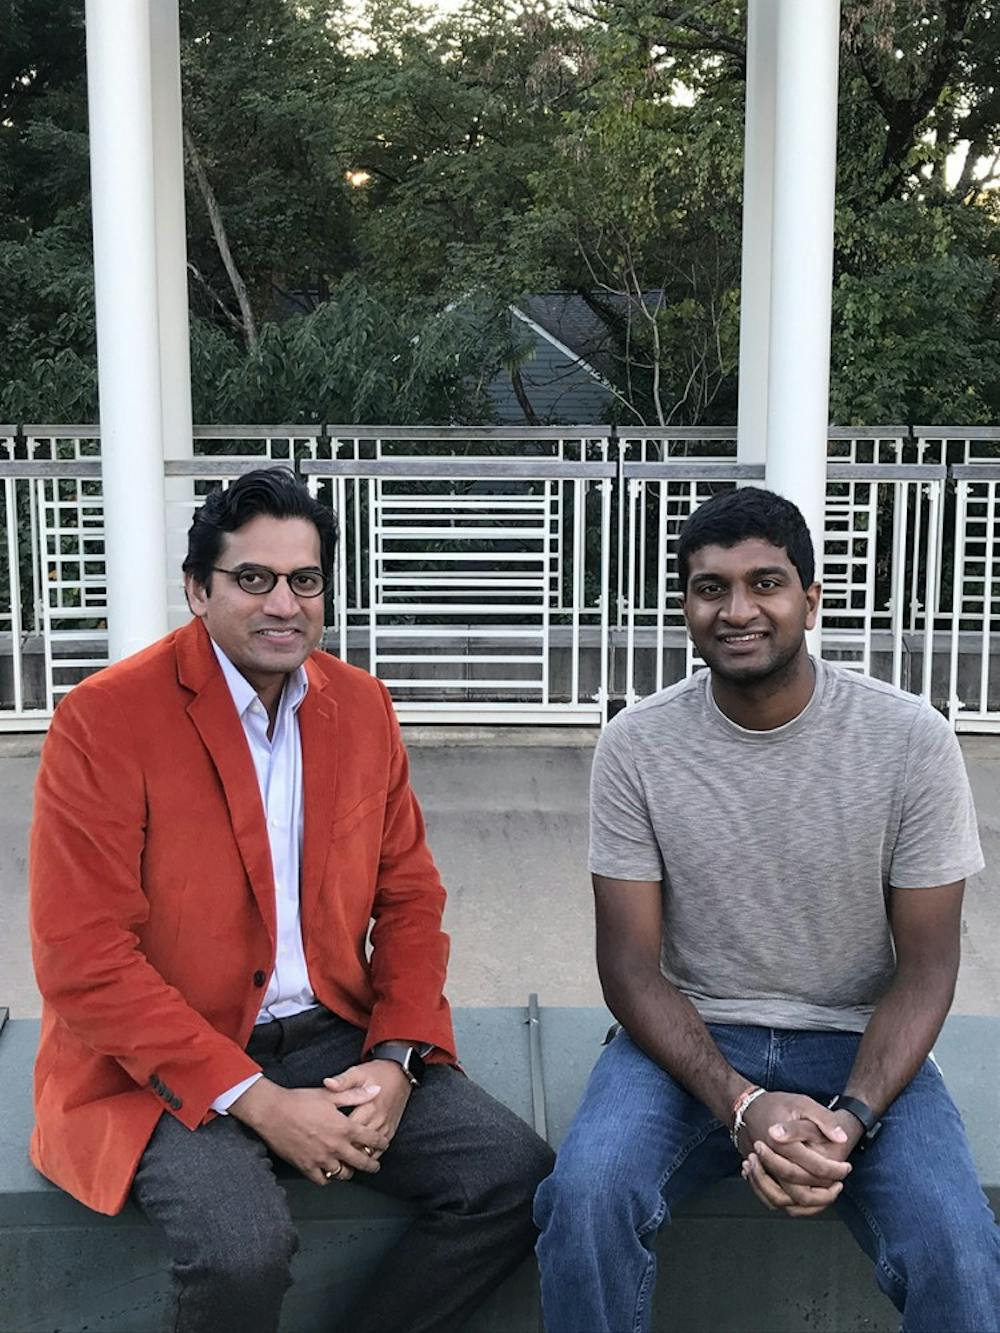 Undergraduate team led by fourth-year Engineering student Ashwinraj Karthikeyan emphasizes the importance of finding an alternative solution to wound care.